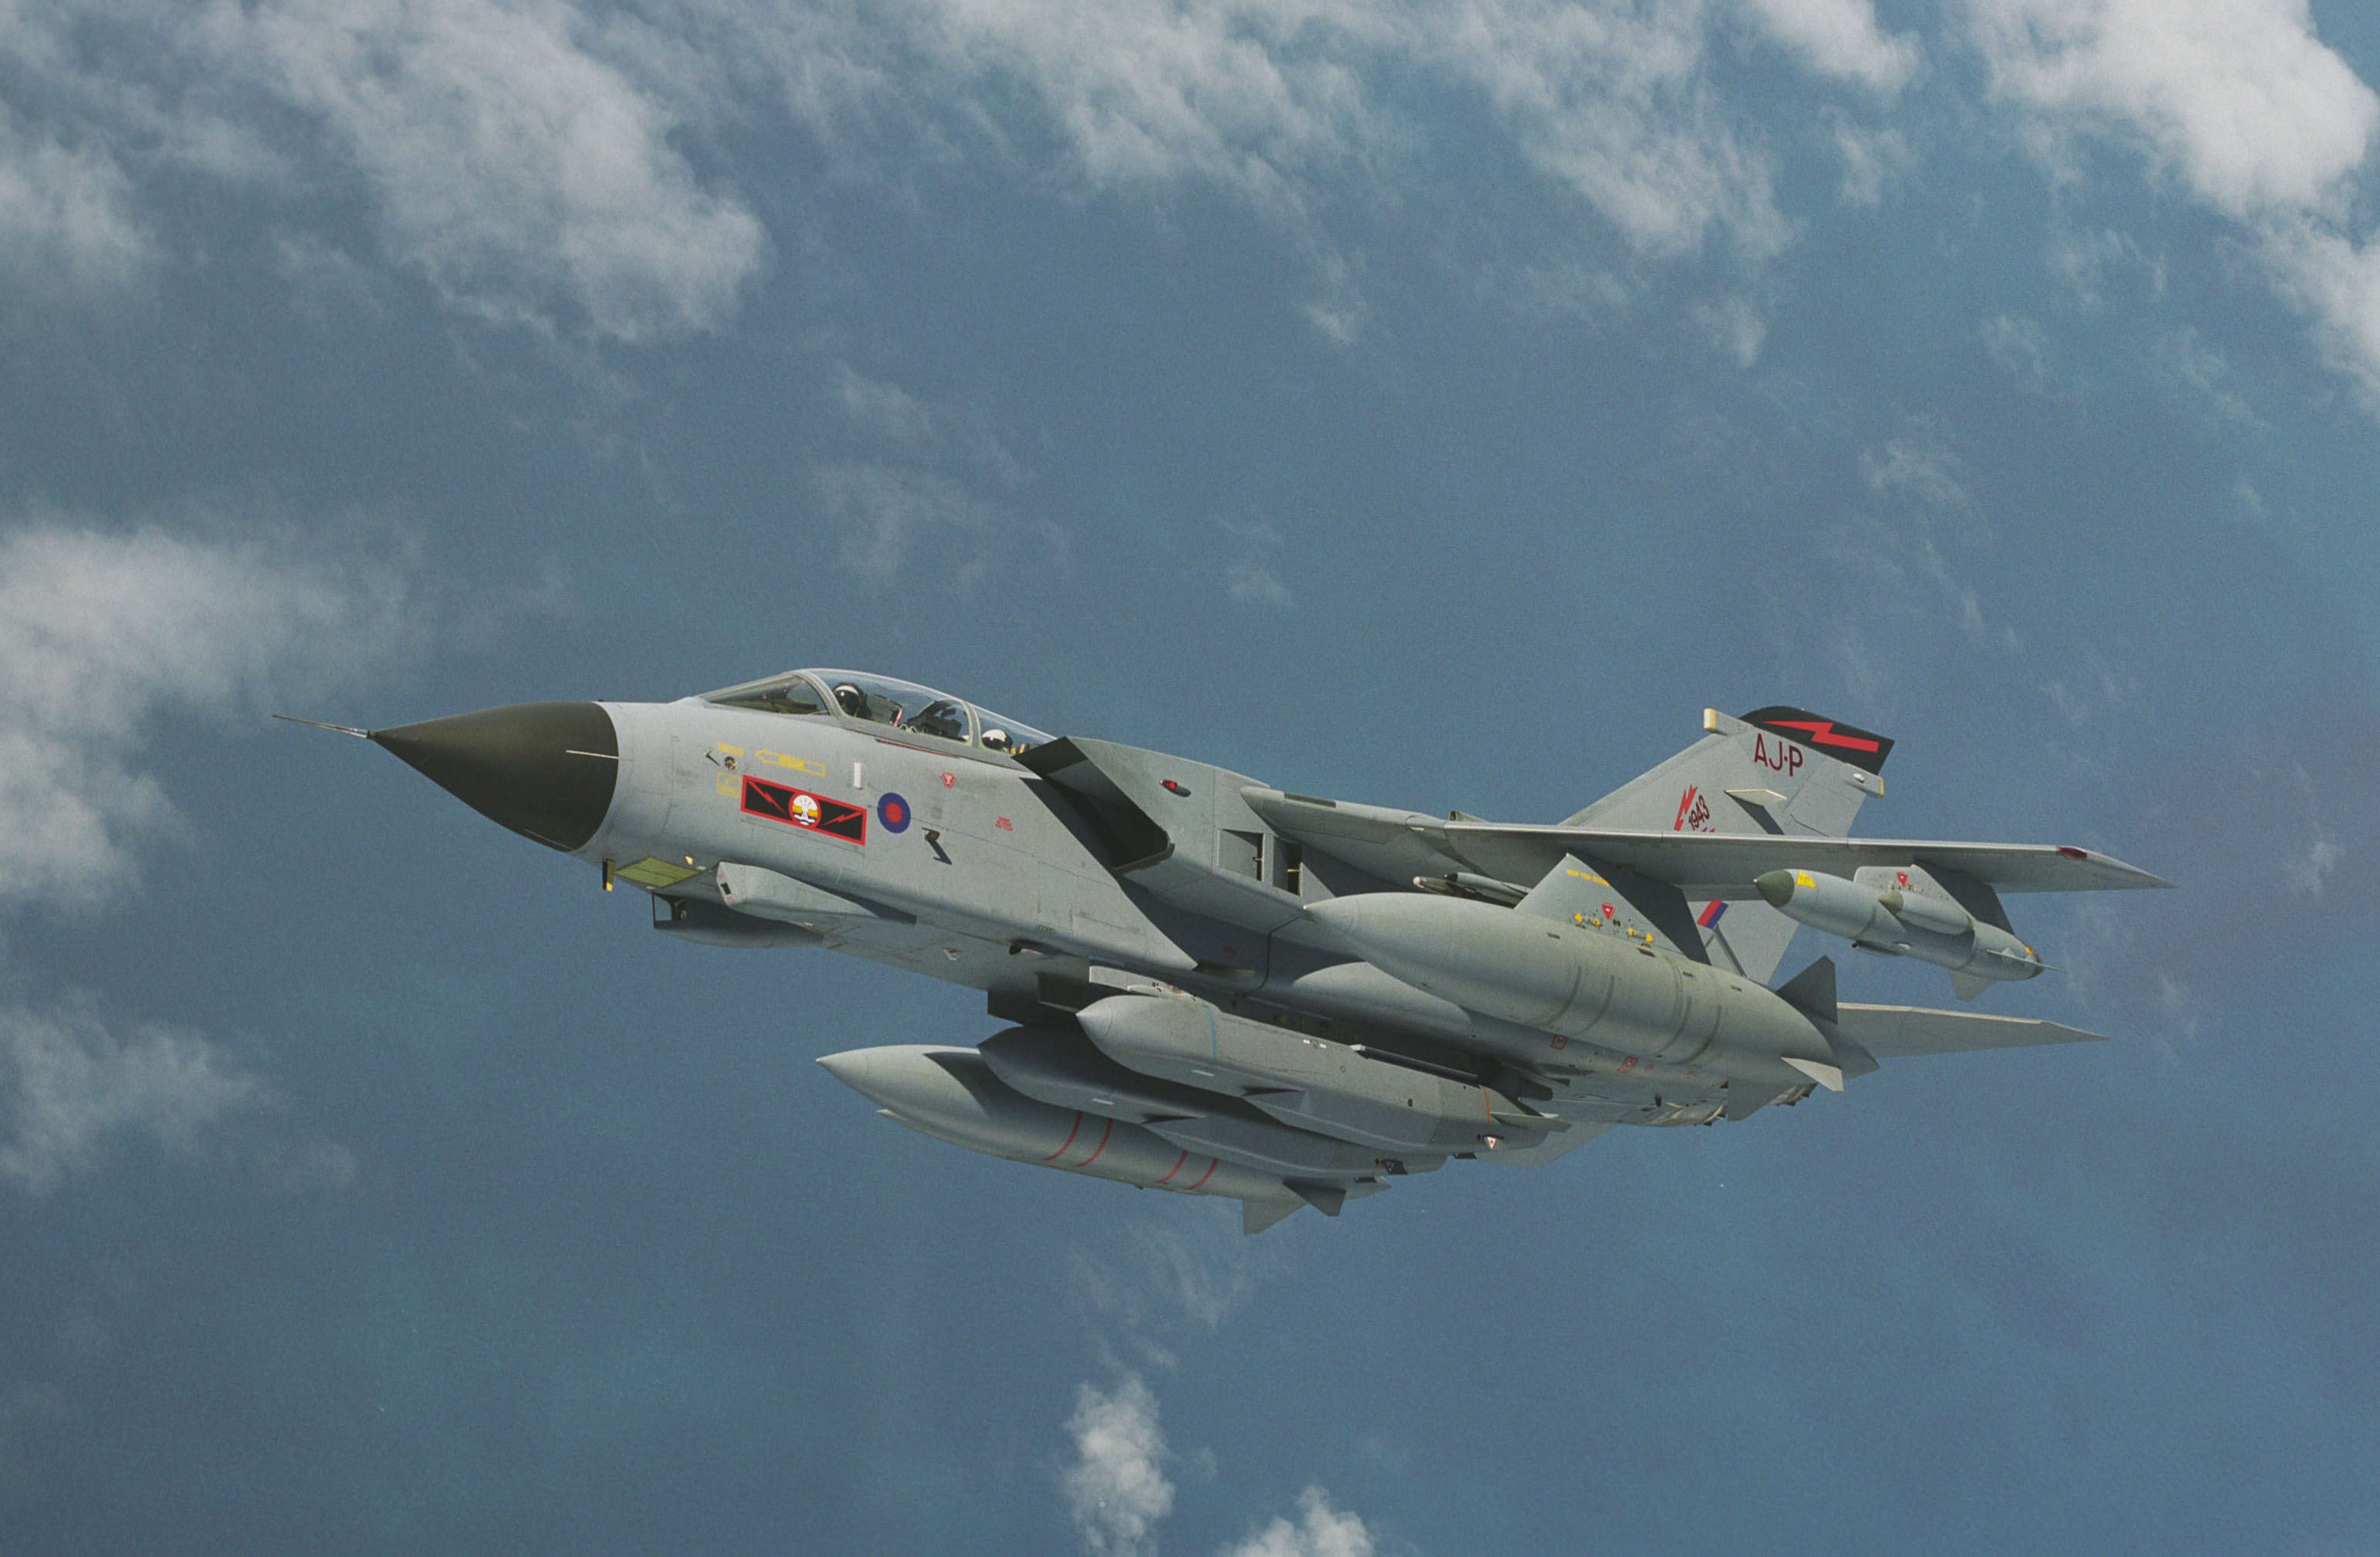 File:Tornado GR4 aircraft fitted with Storm Shadow cruise missile.jpg ...